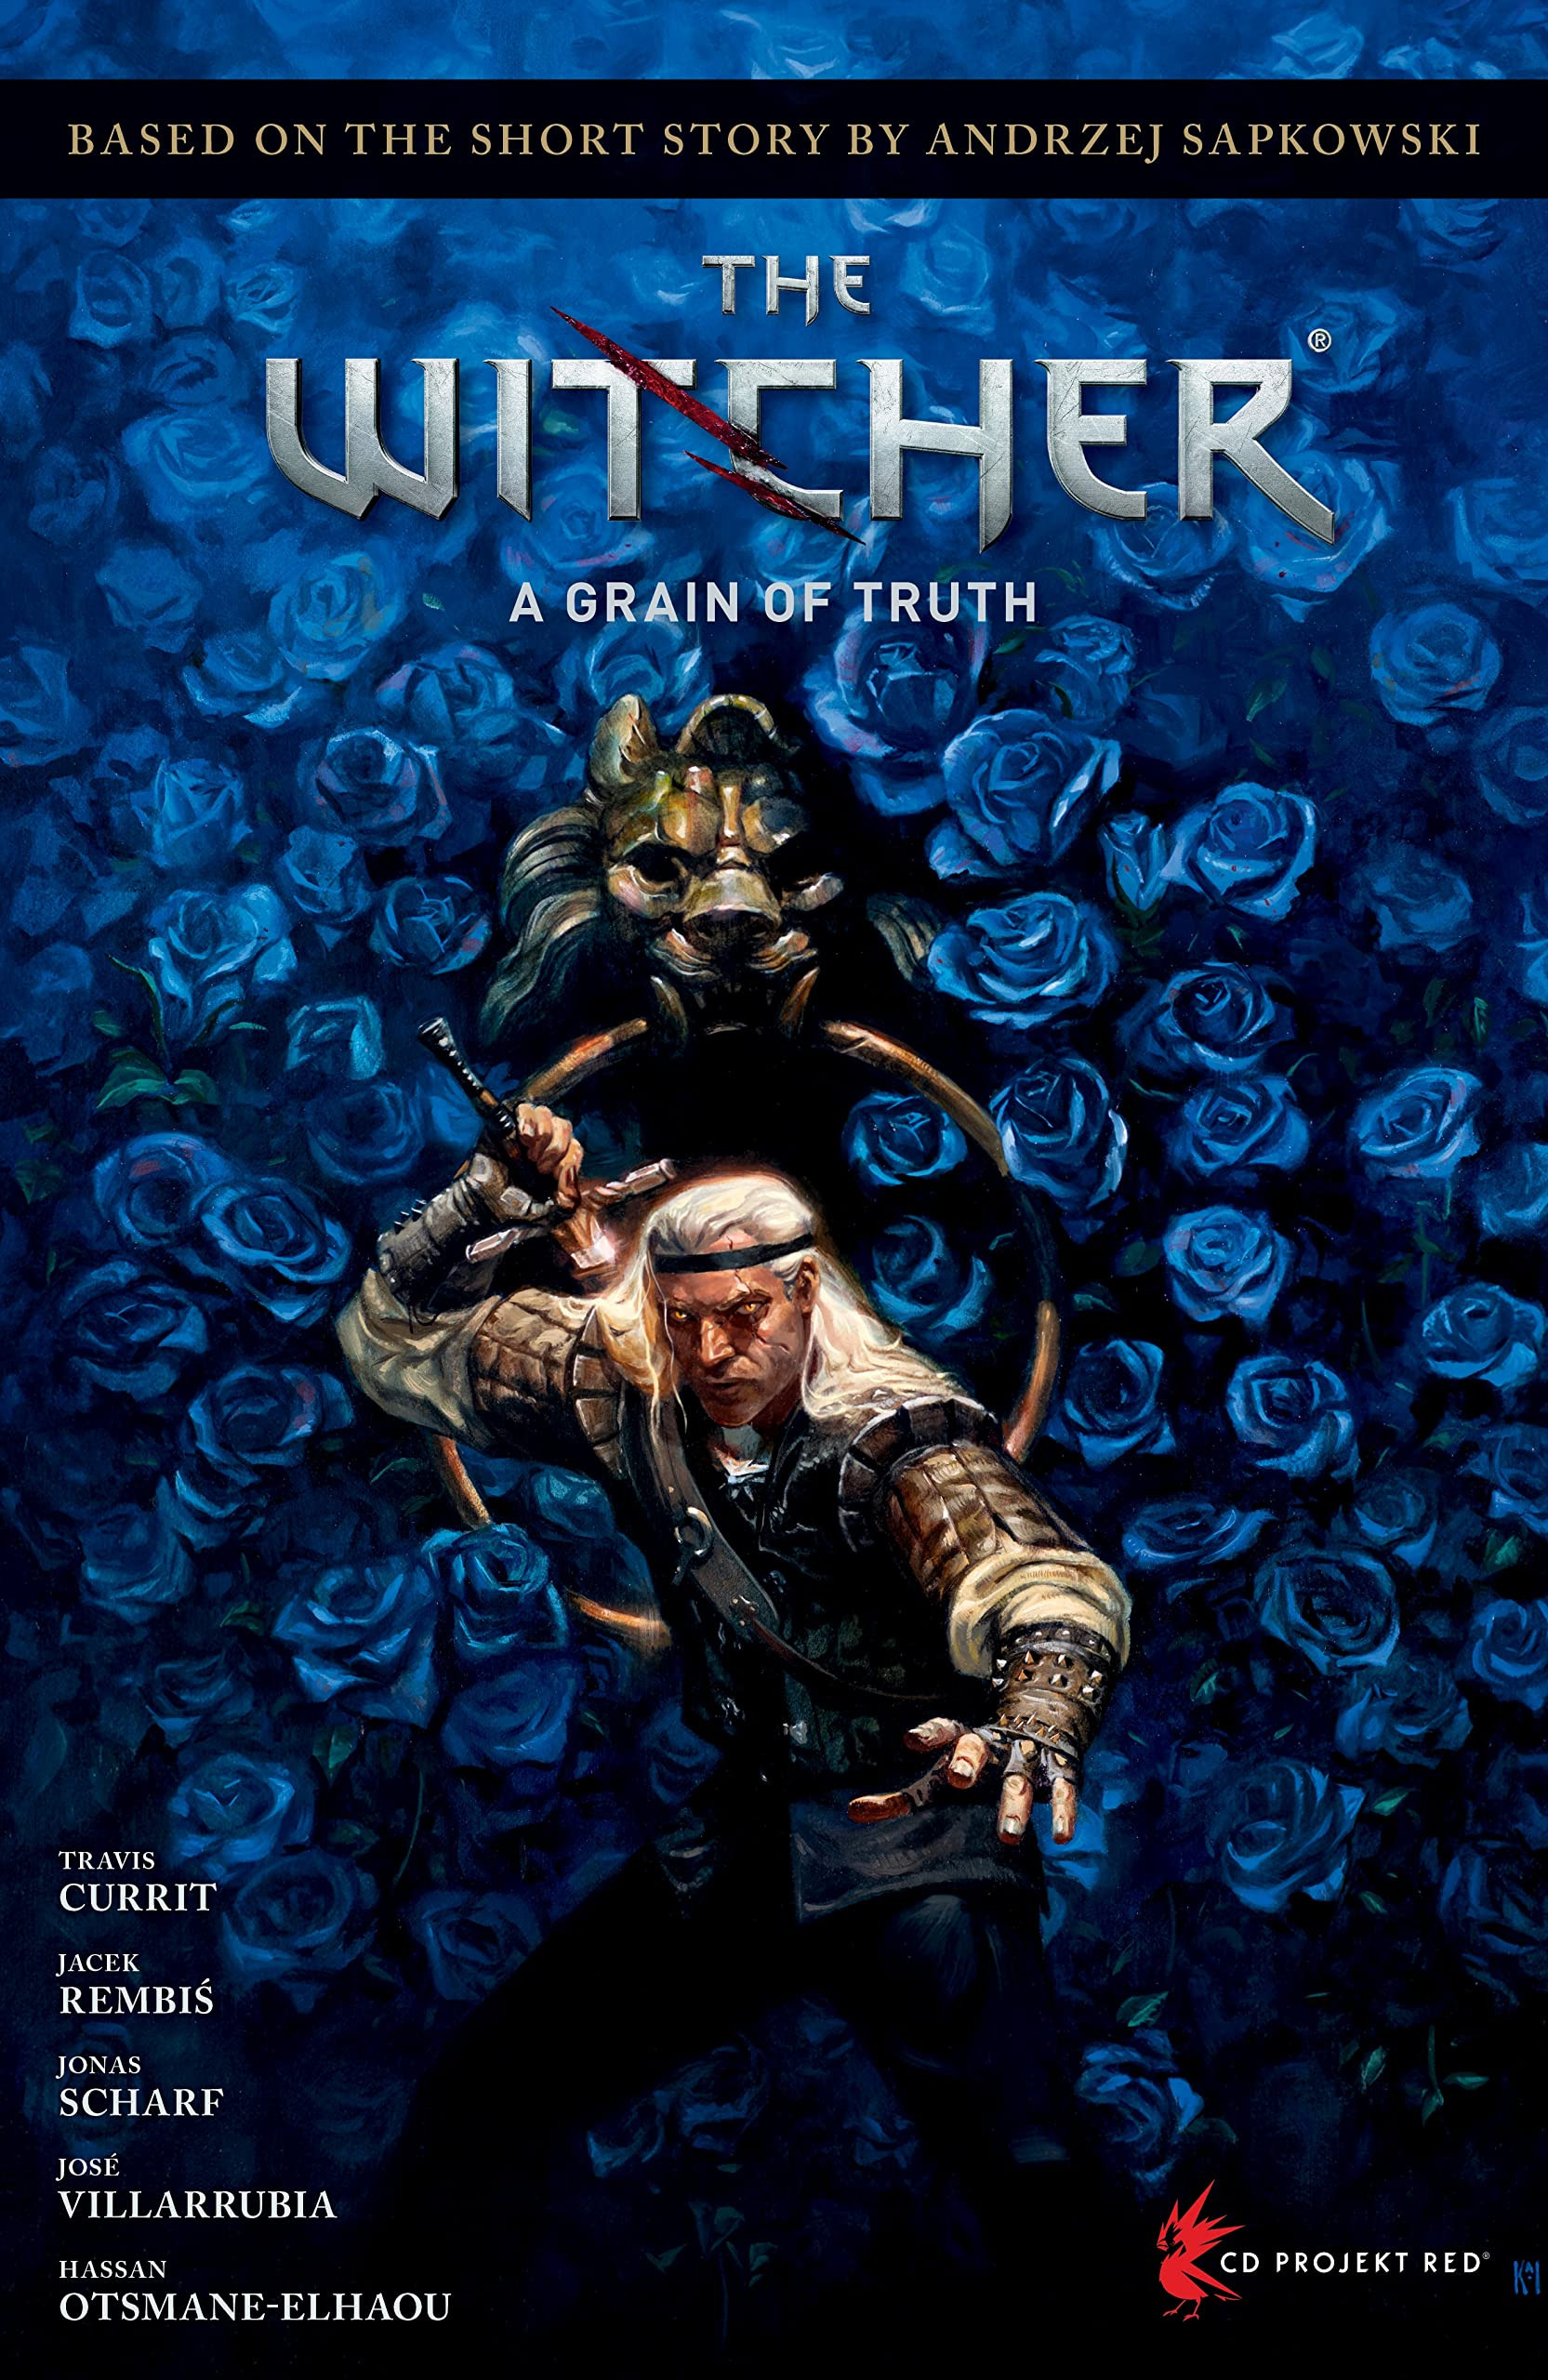 The Witcher - A Grain of Truth